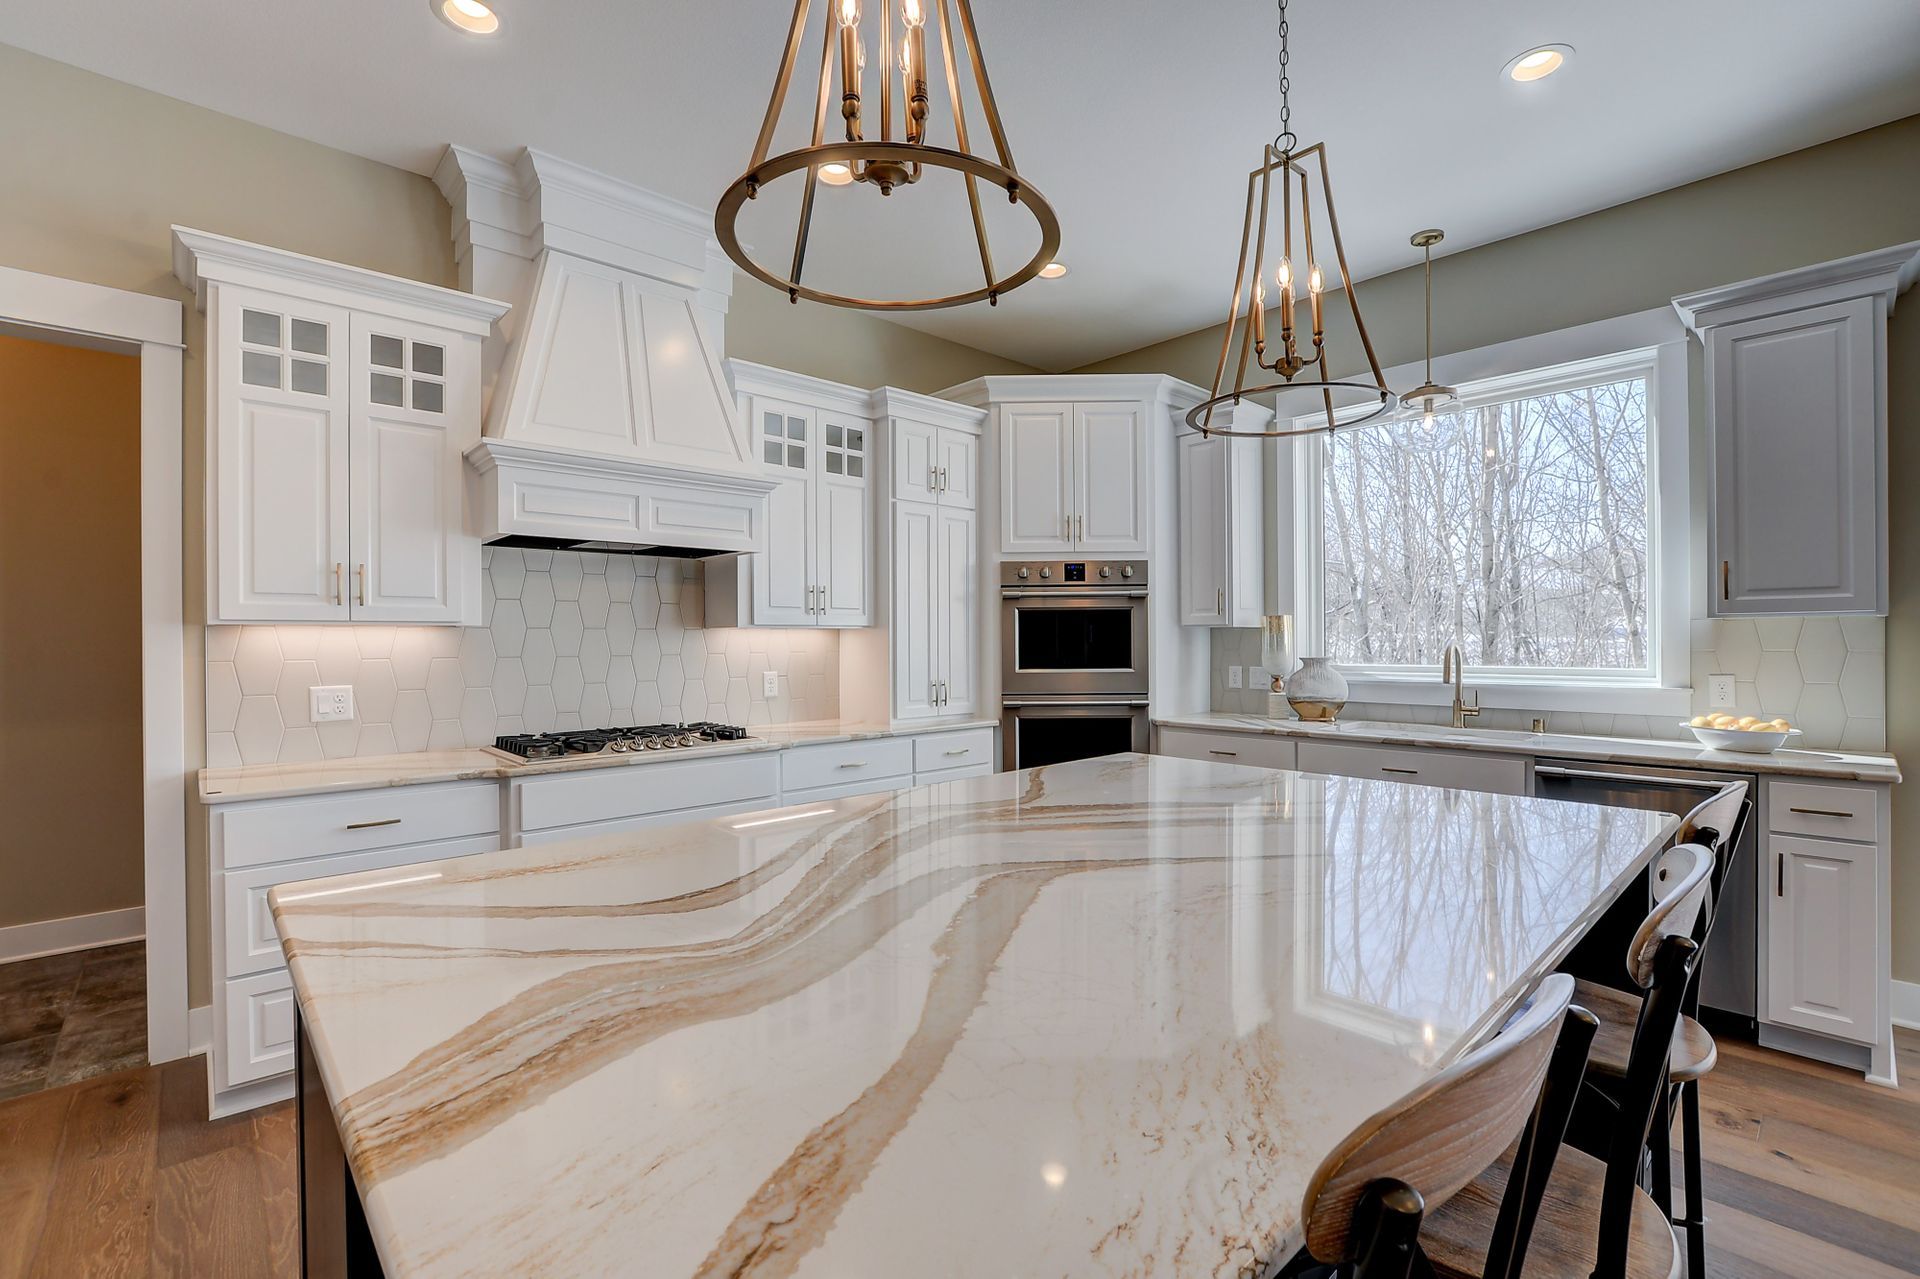 Brittanicca Gold Cambria Quartz Kitchen Countertops with White Wood Cabinets, Wood Floors, and Bar Stools